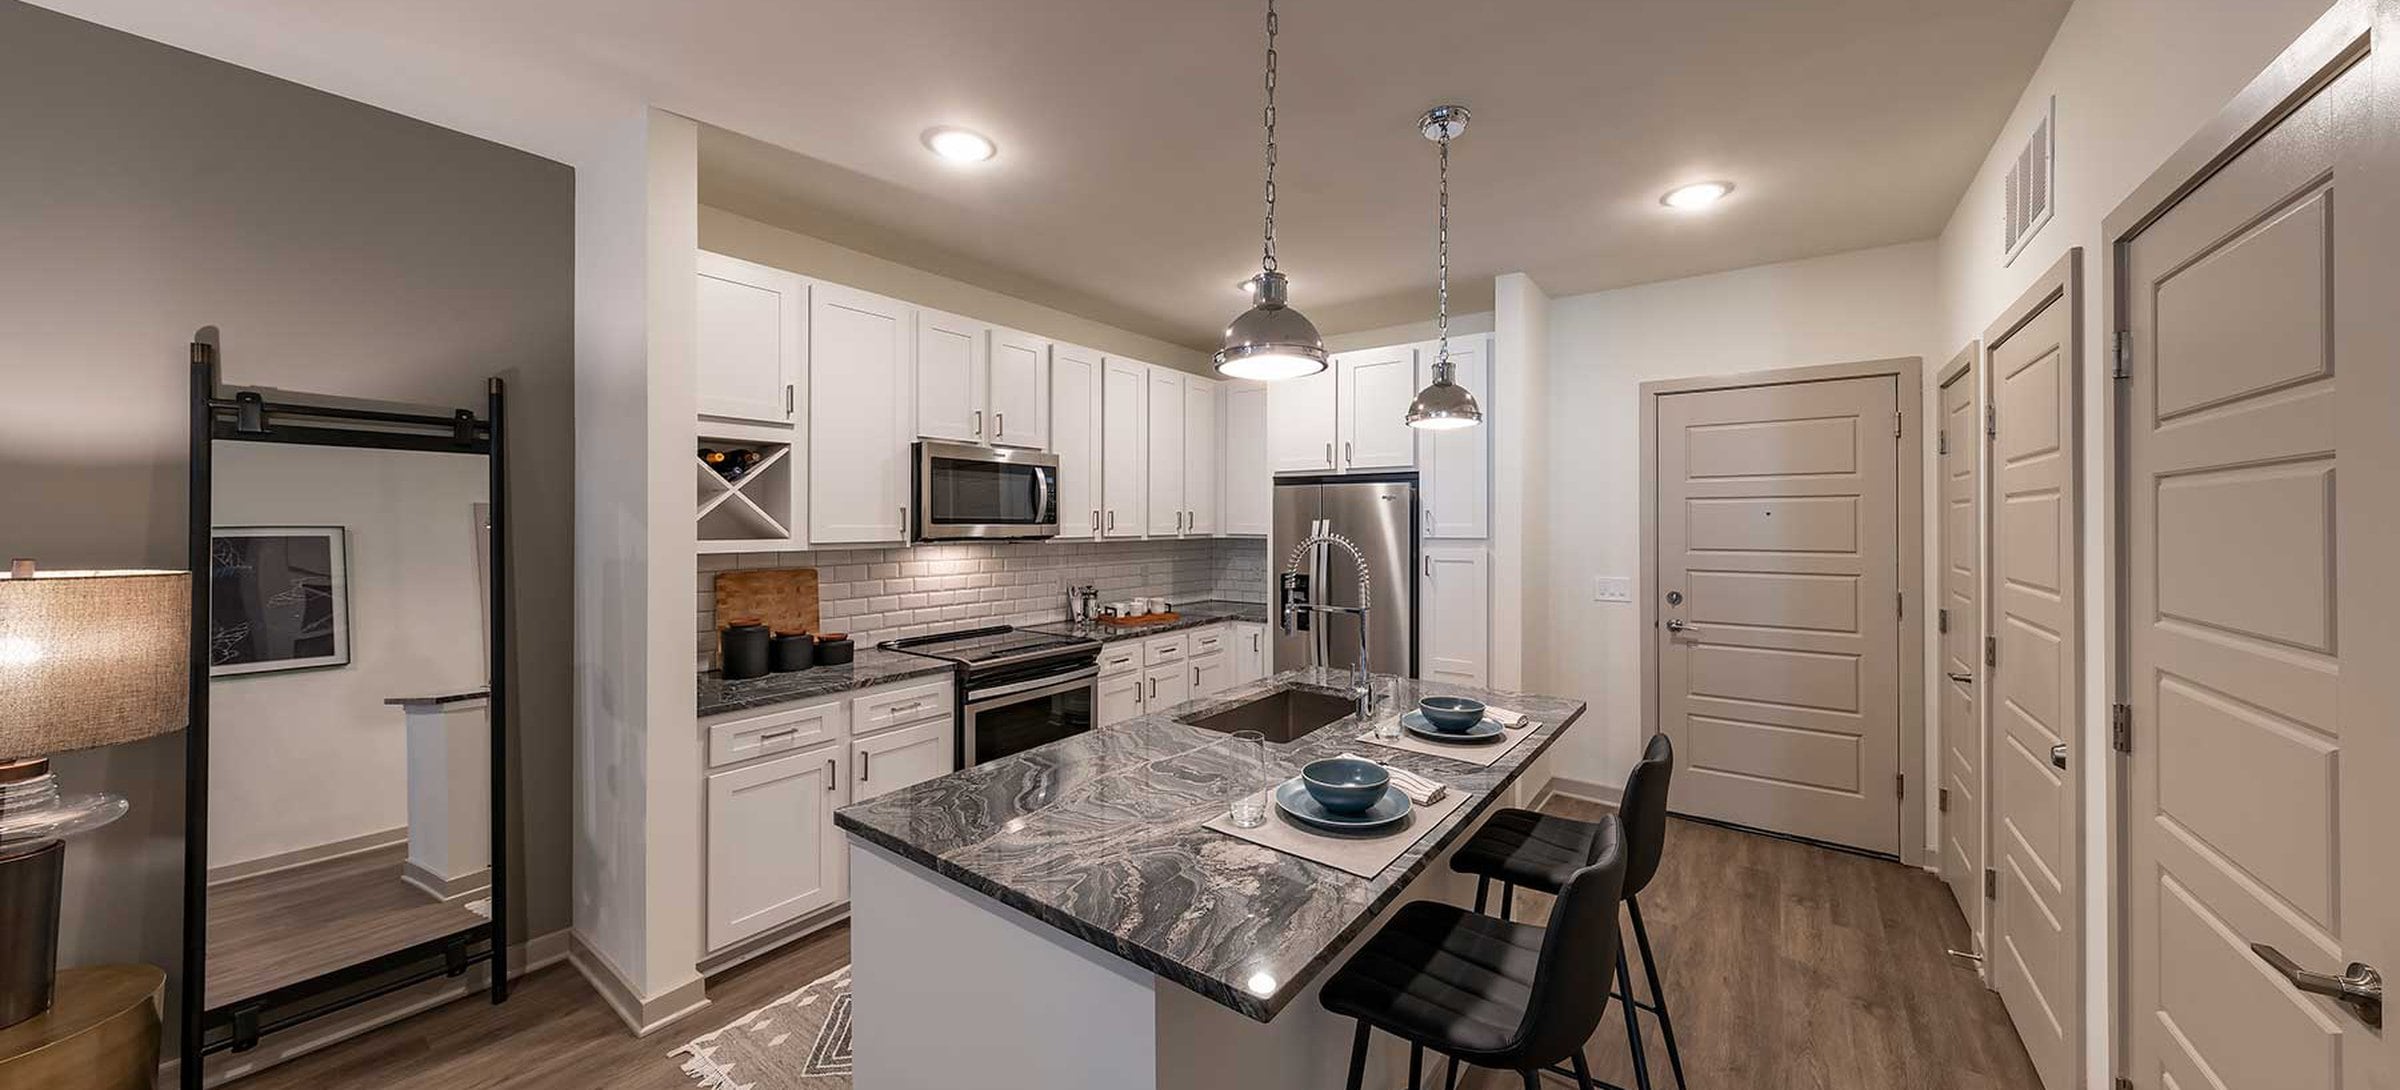 East Classic II kitchen with white cabinetry, marbled granite countertops, stainless steel appliances, tile backsplash, and hard surface plank flooring